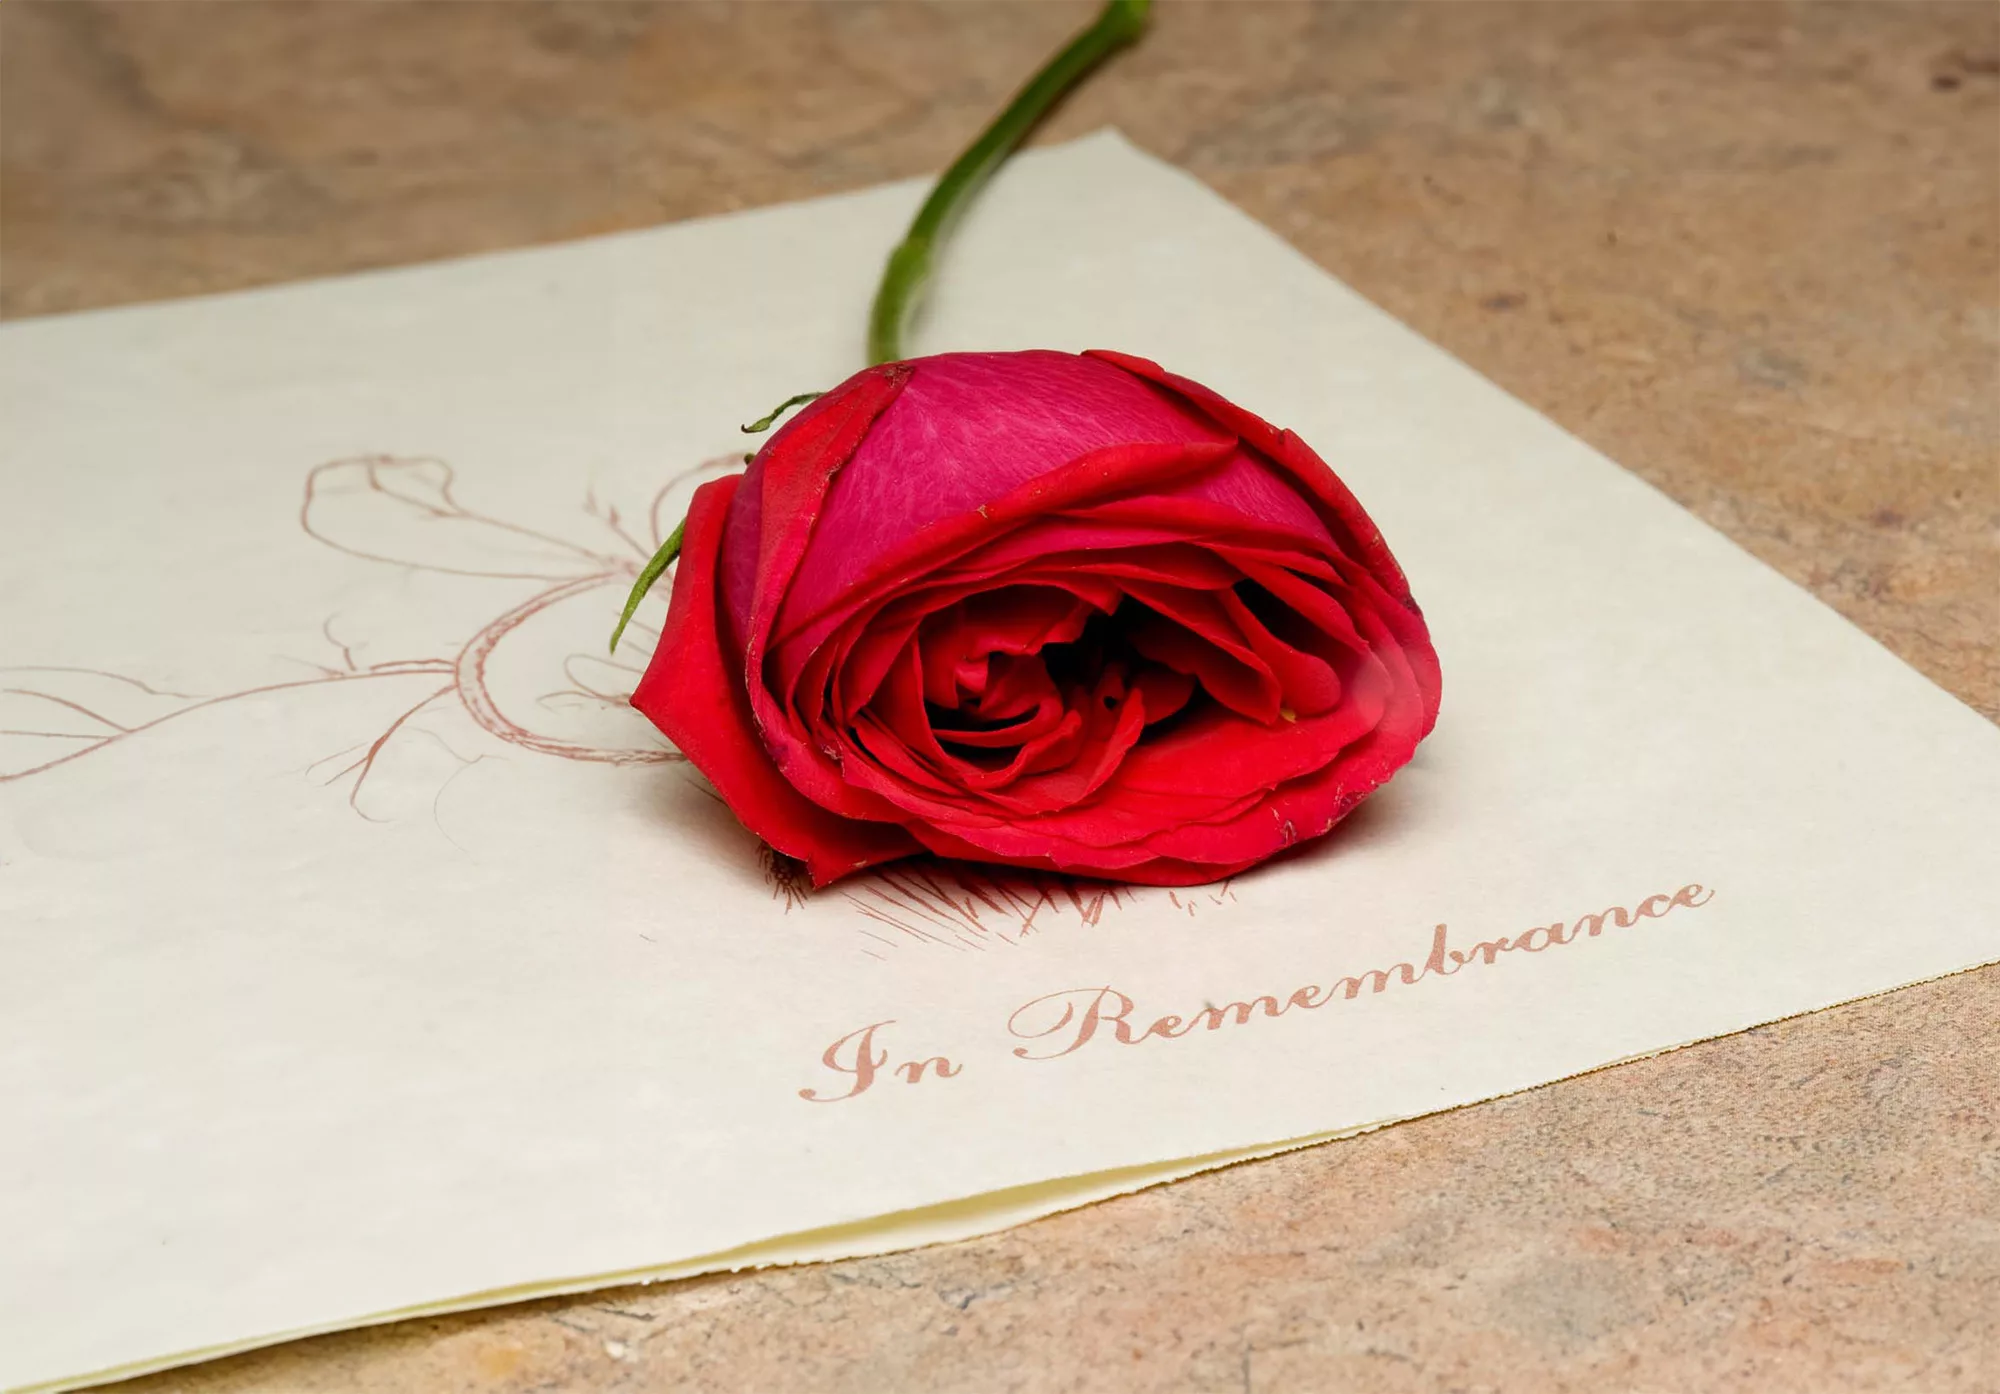 A funeral remembrance card with a single red rose.